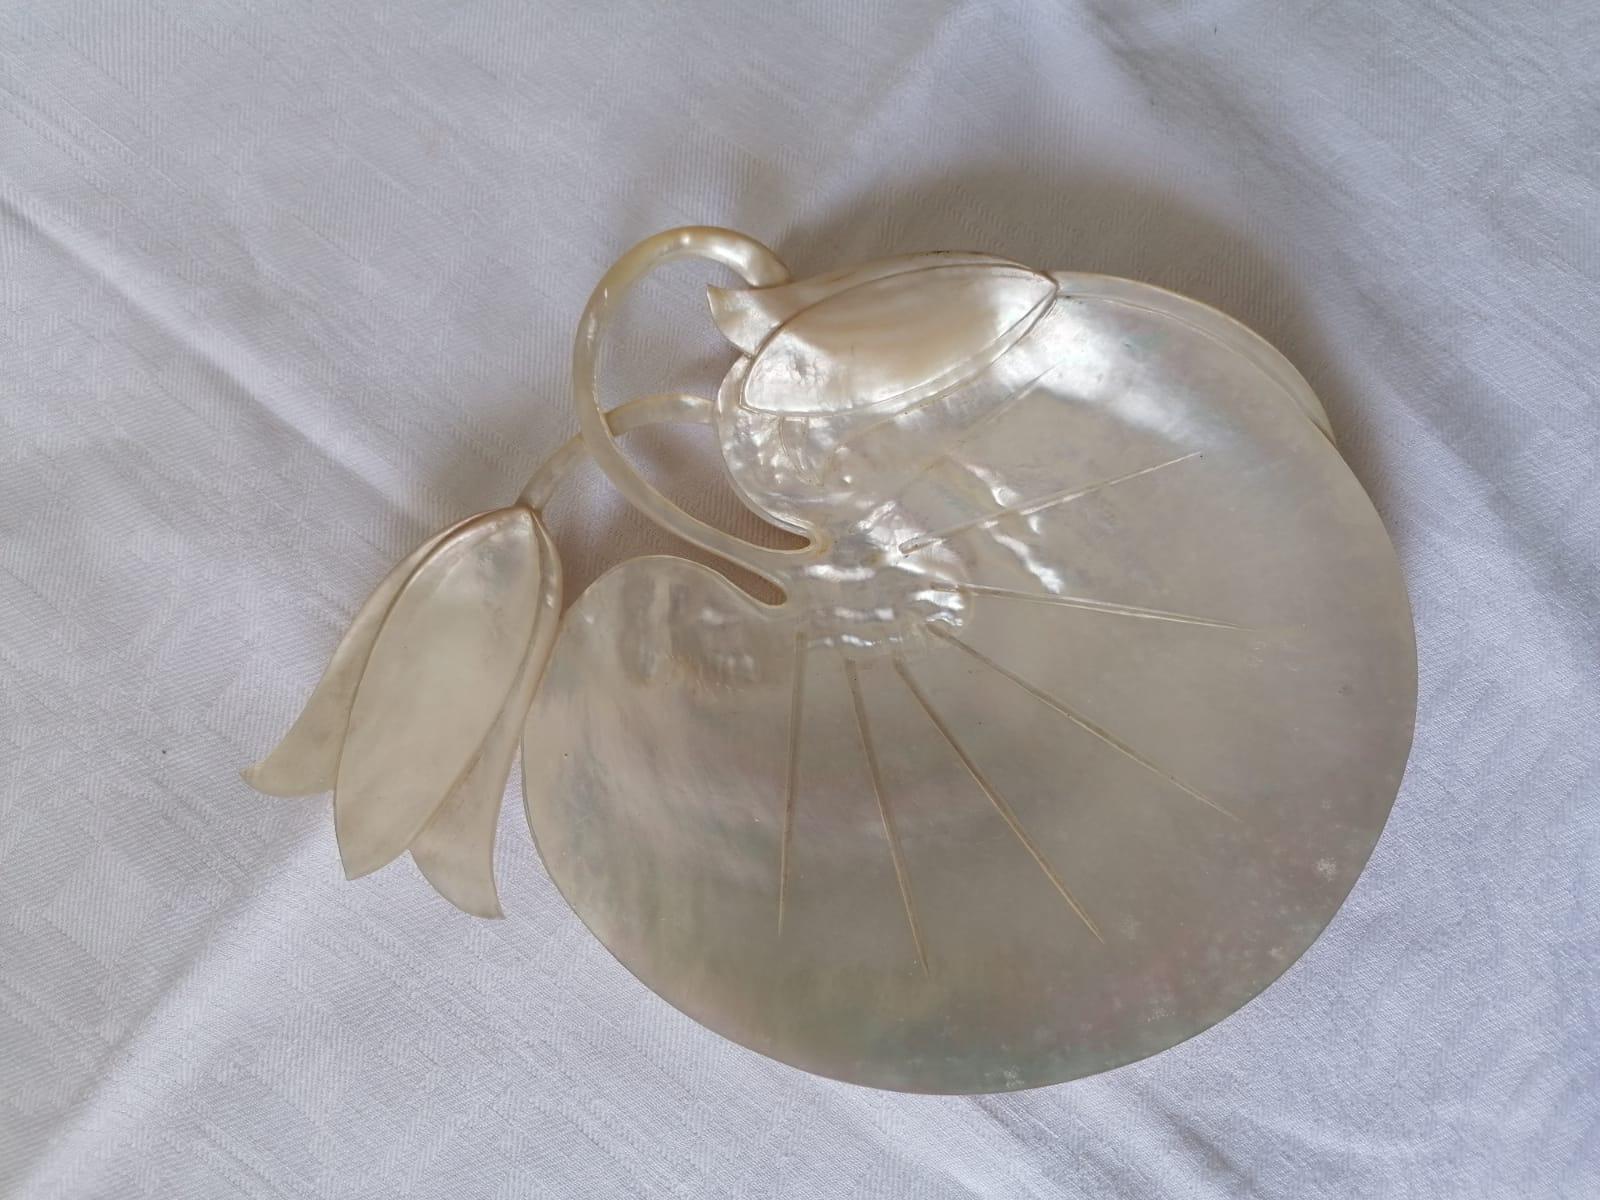 Art Nouveau carved shell plate, great artisan quality, made in France, circa 1900.
Beautiful original condition.